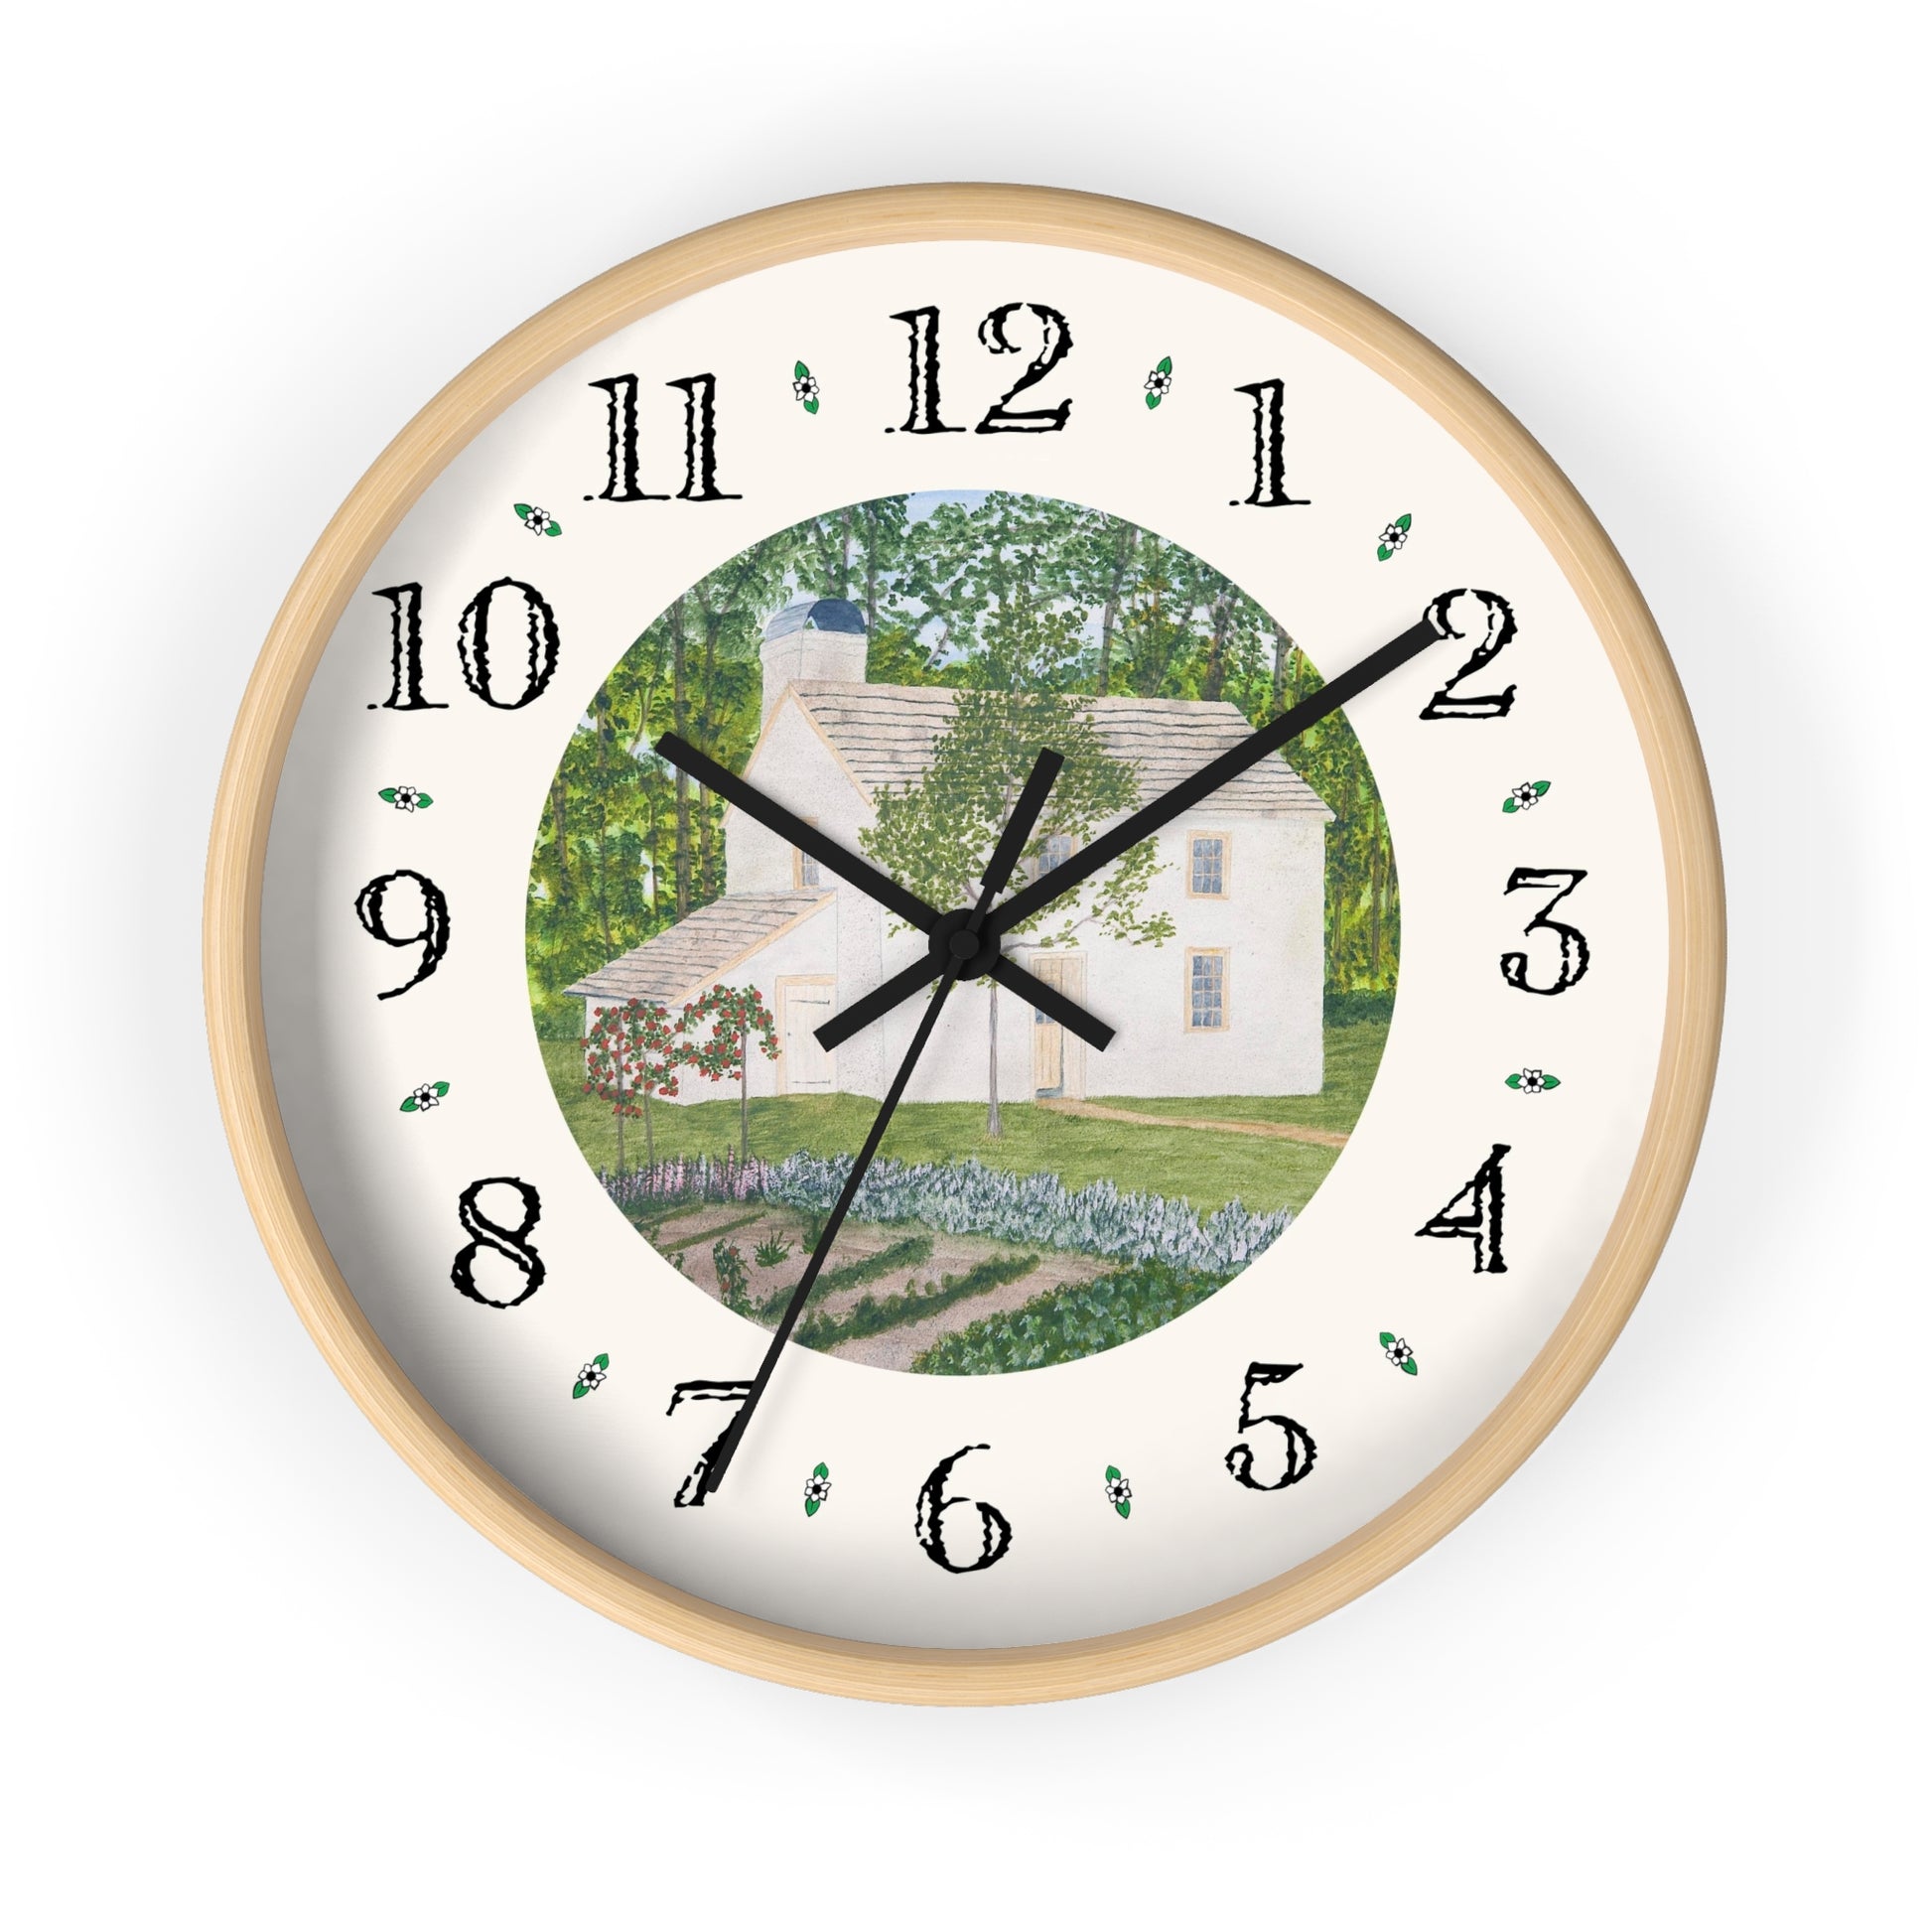 The Country Garden Heirloom Designer Clock features a reproduction of a watercolor by artist Lee M.  Buchanan.  The clock has hand crafted country designs between the clock numbers. Add this charming clock to any room in your home!